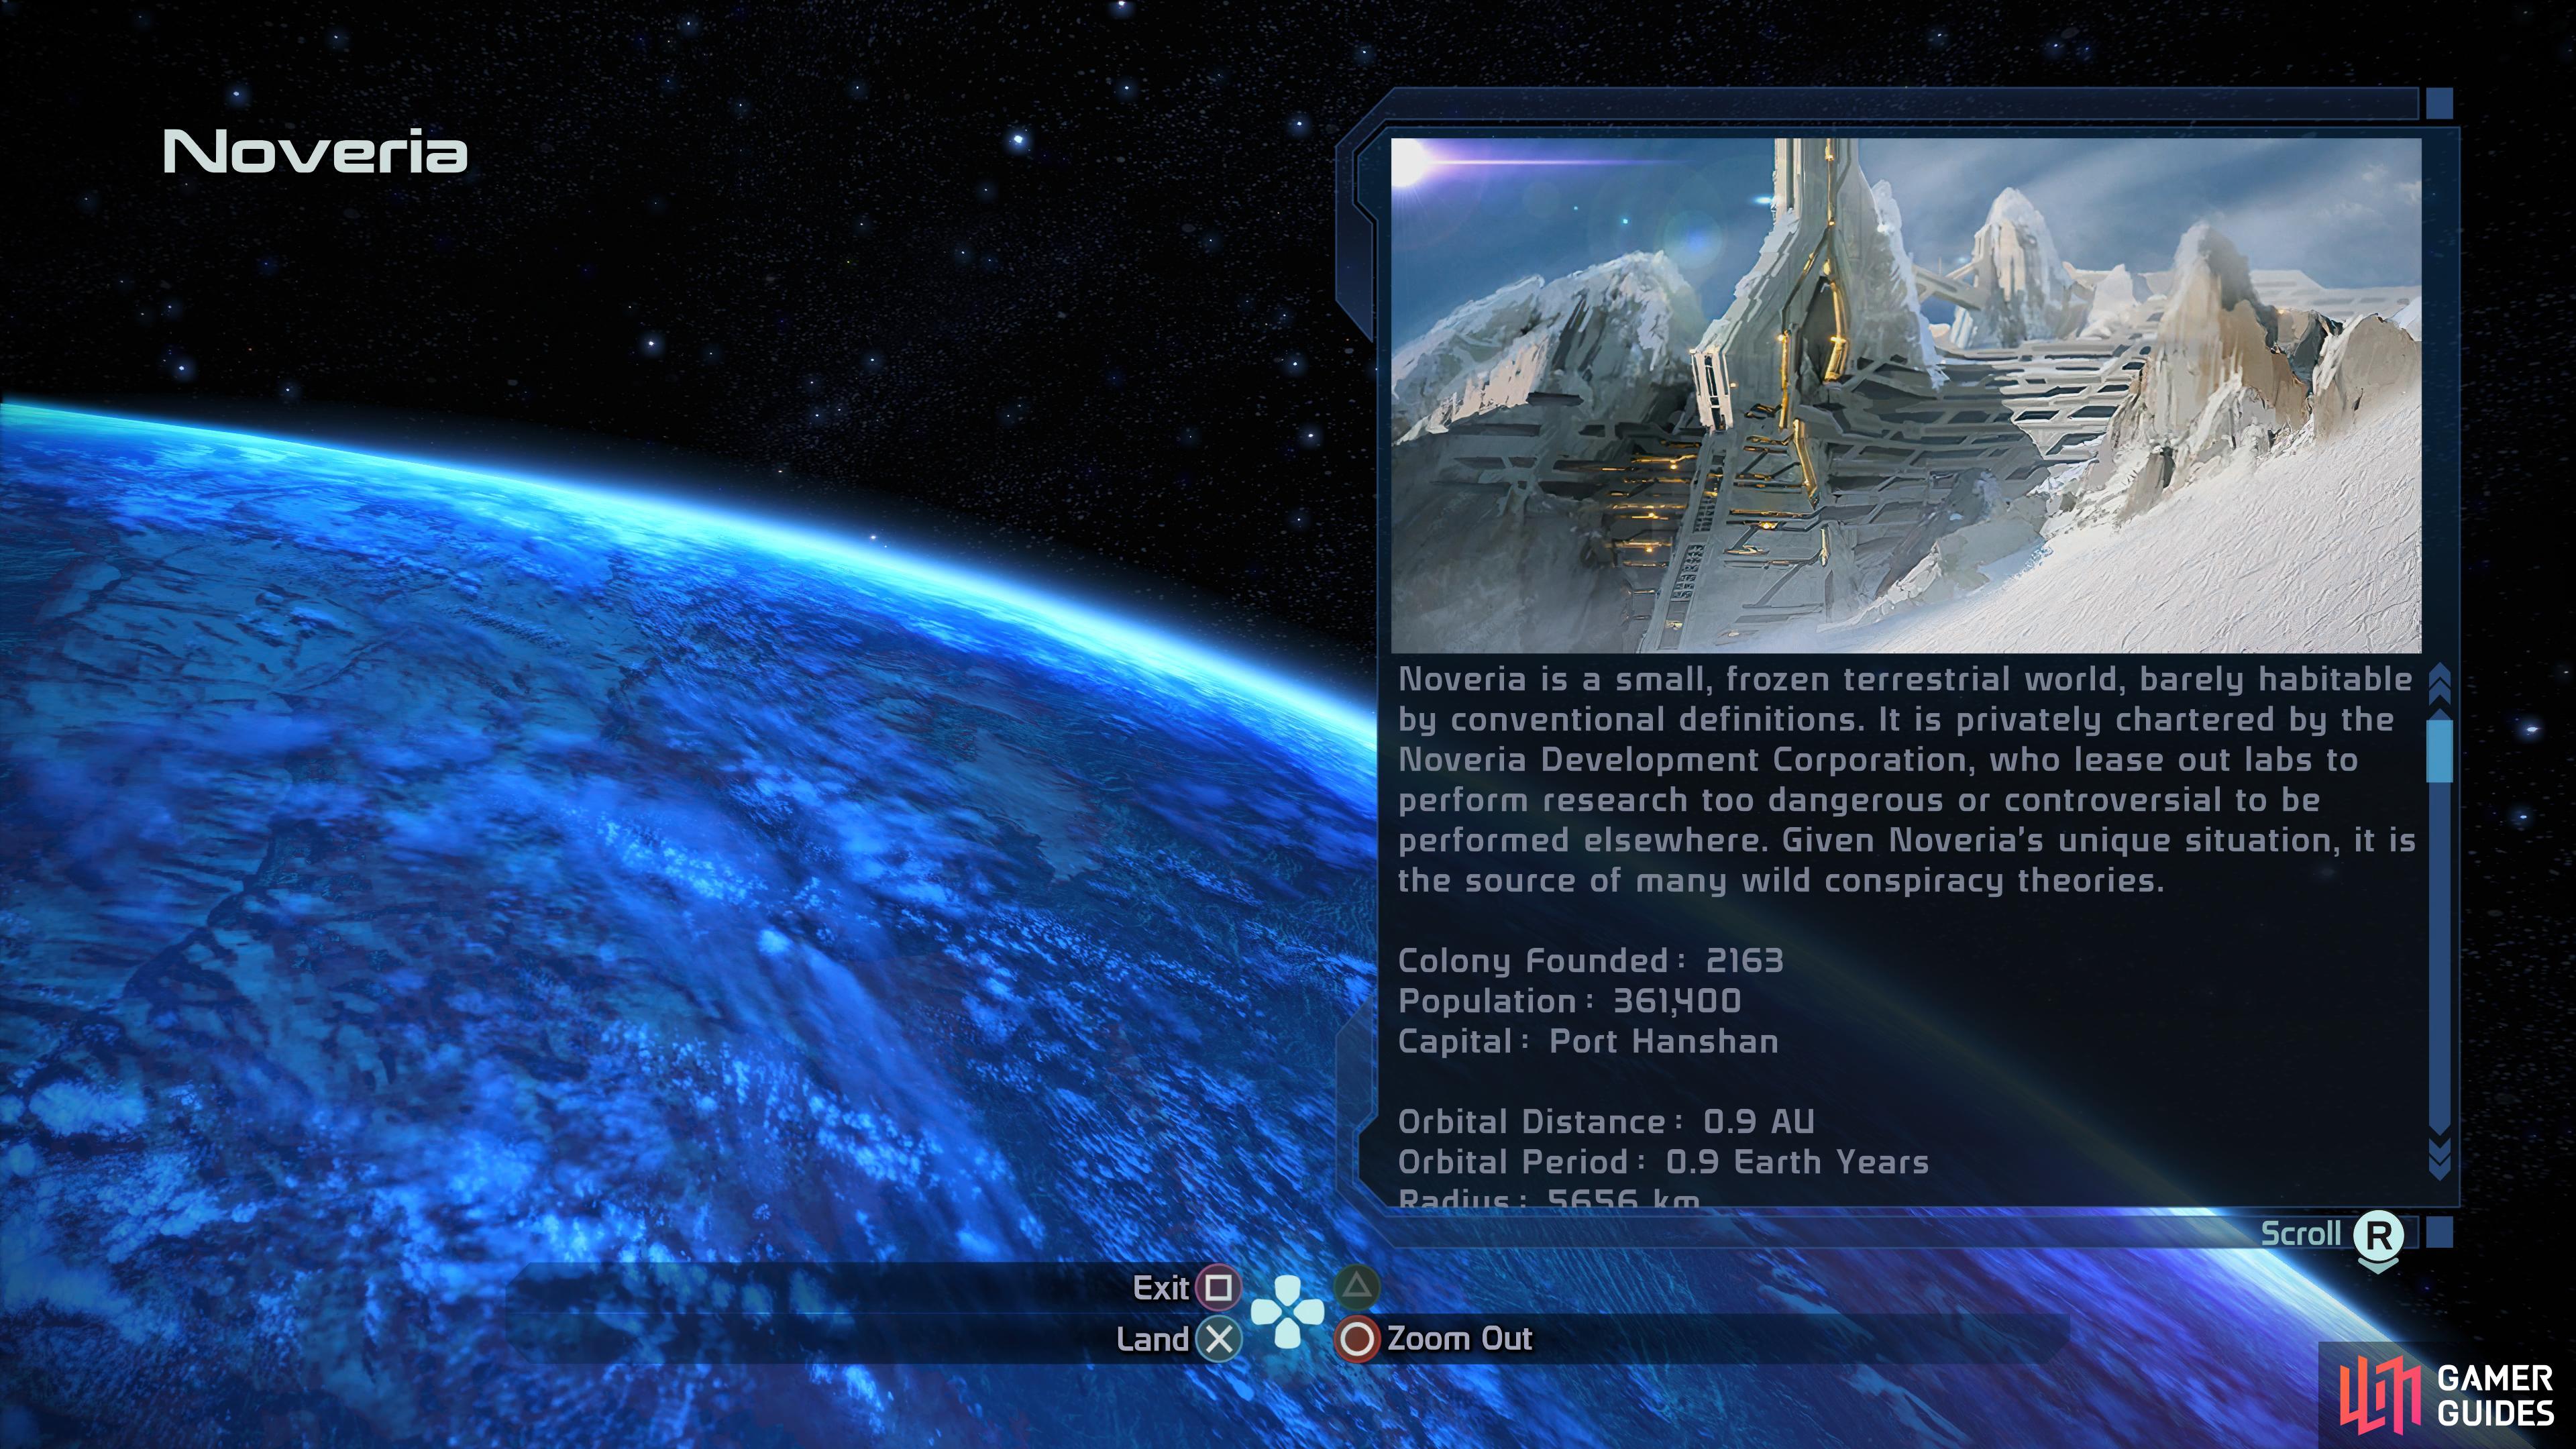 One of the game’s core missions takes place on Noveria.